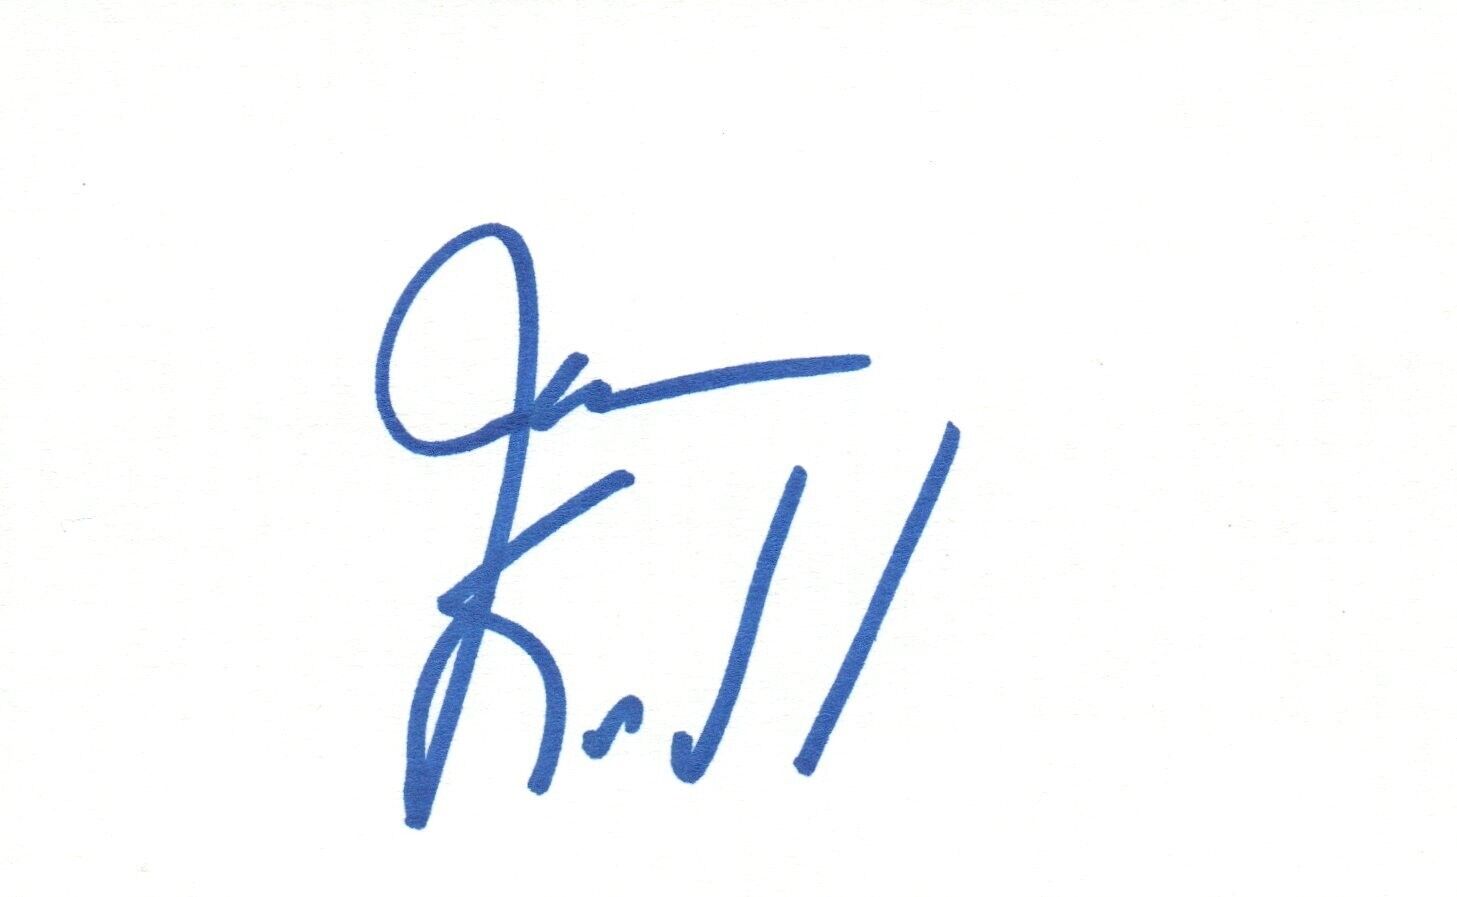 Jason Kidd Signed 3x5 Index Card With Unsigned 8x10 Basketball Photo